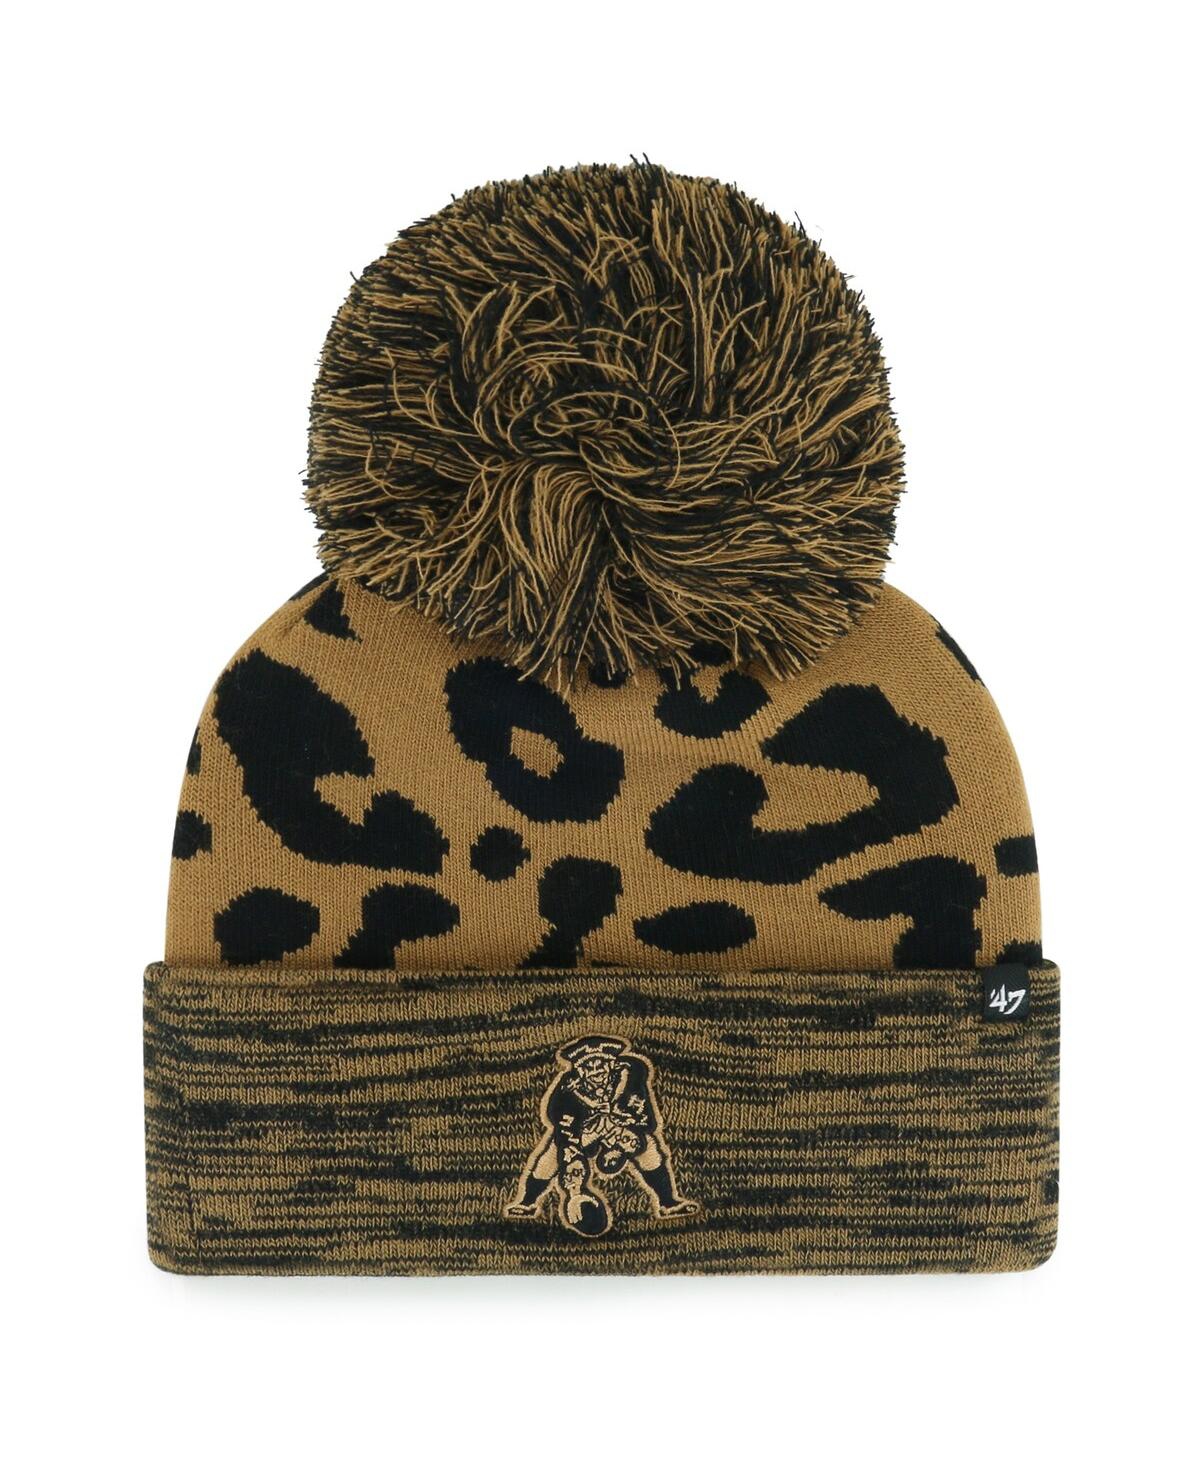 Women's '47 Brand Brown New England Patriots Rosette Cuffed Knit Hat with Pom - Brown